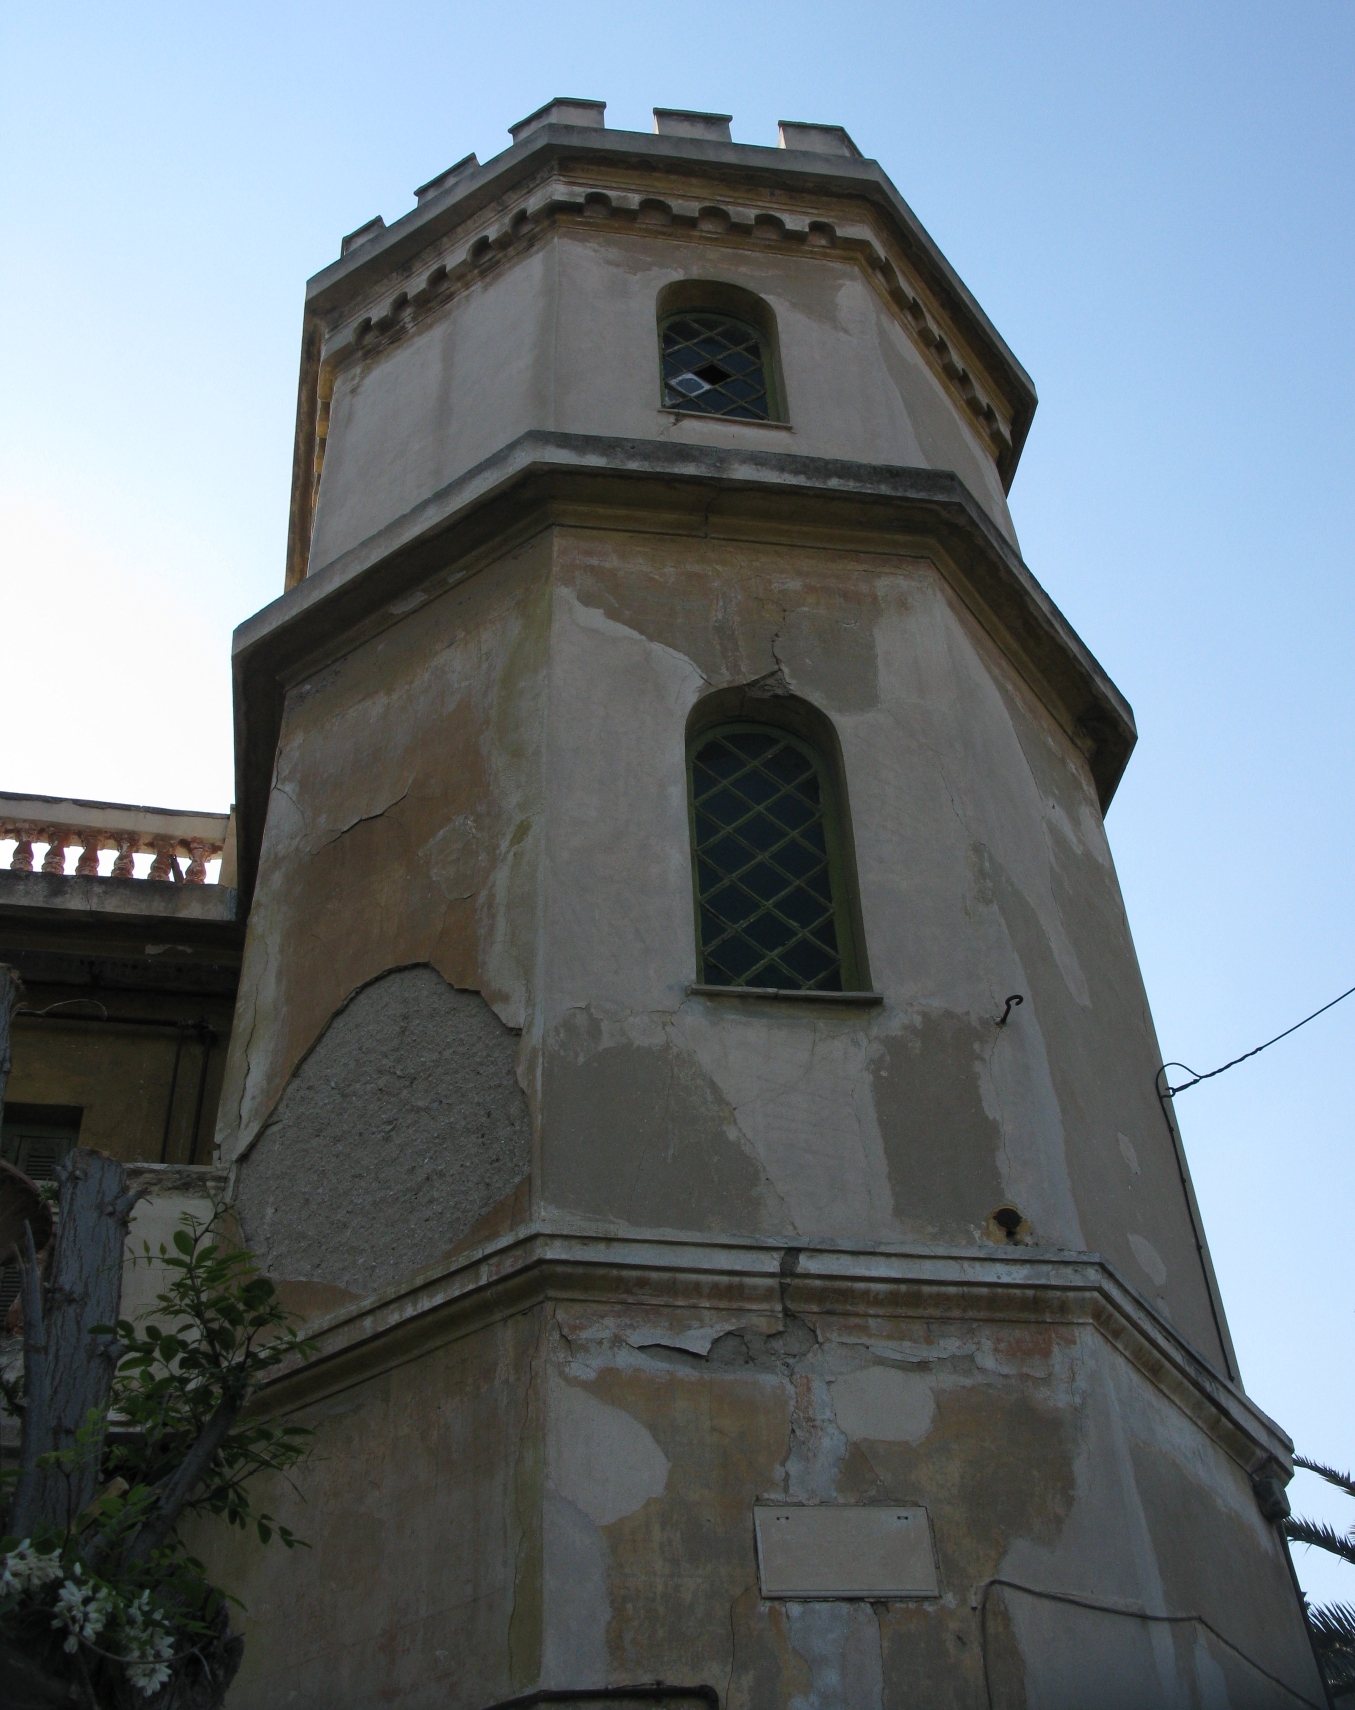 a very old tower with a stained glass window